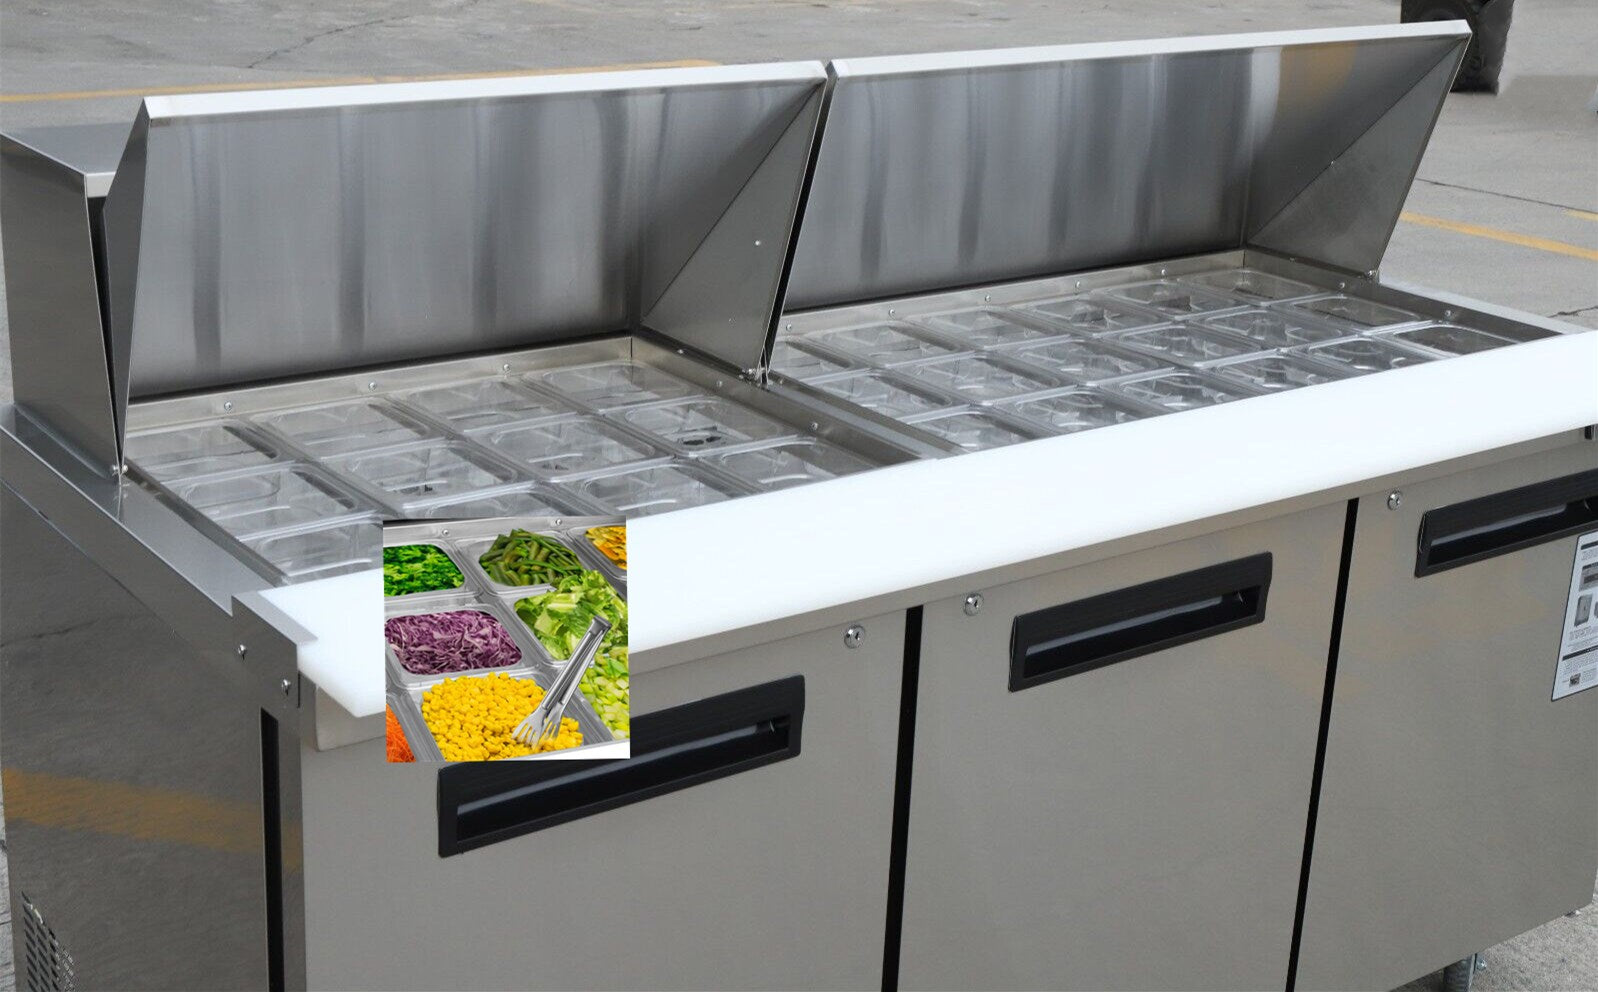 Stainless Steel Display Freeze Food Counter, For Restaurant at Rs